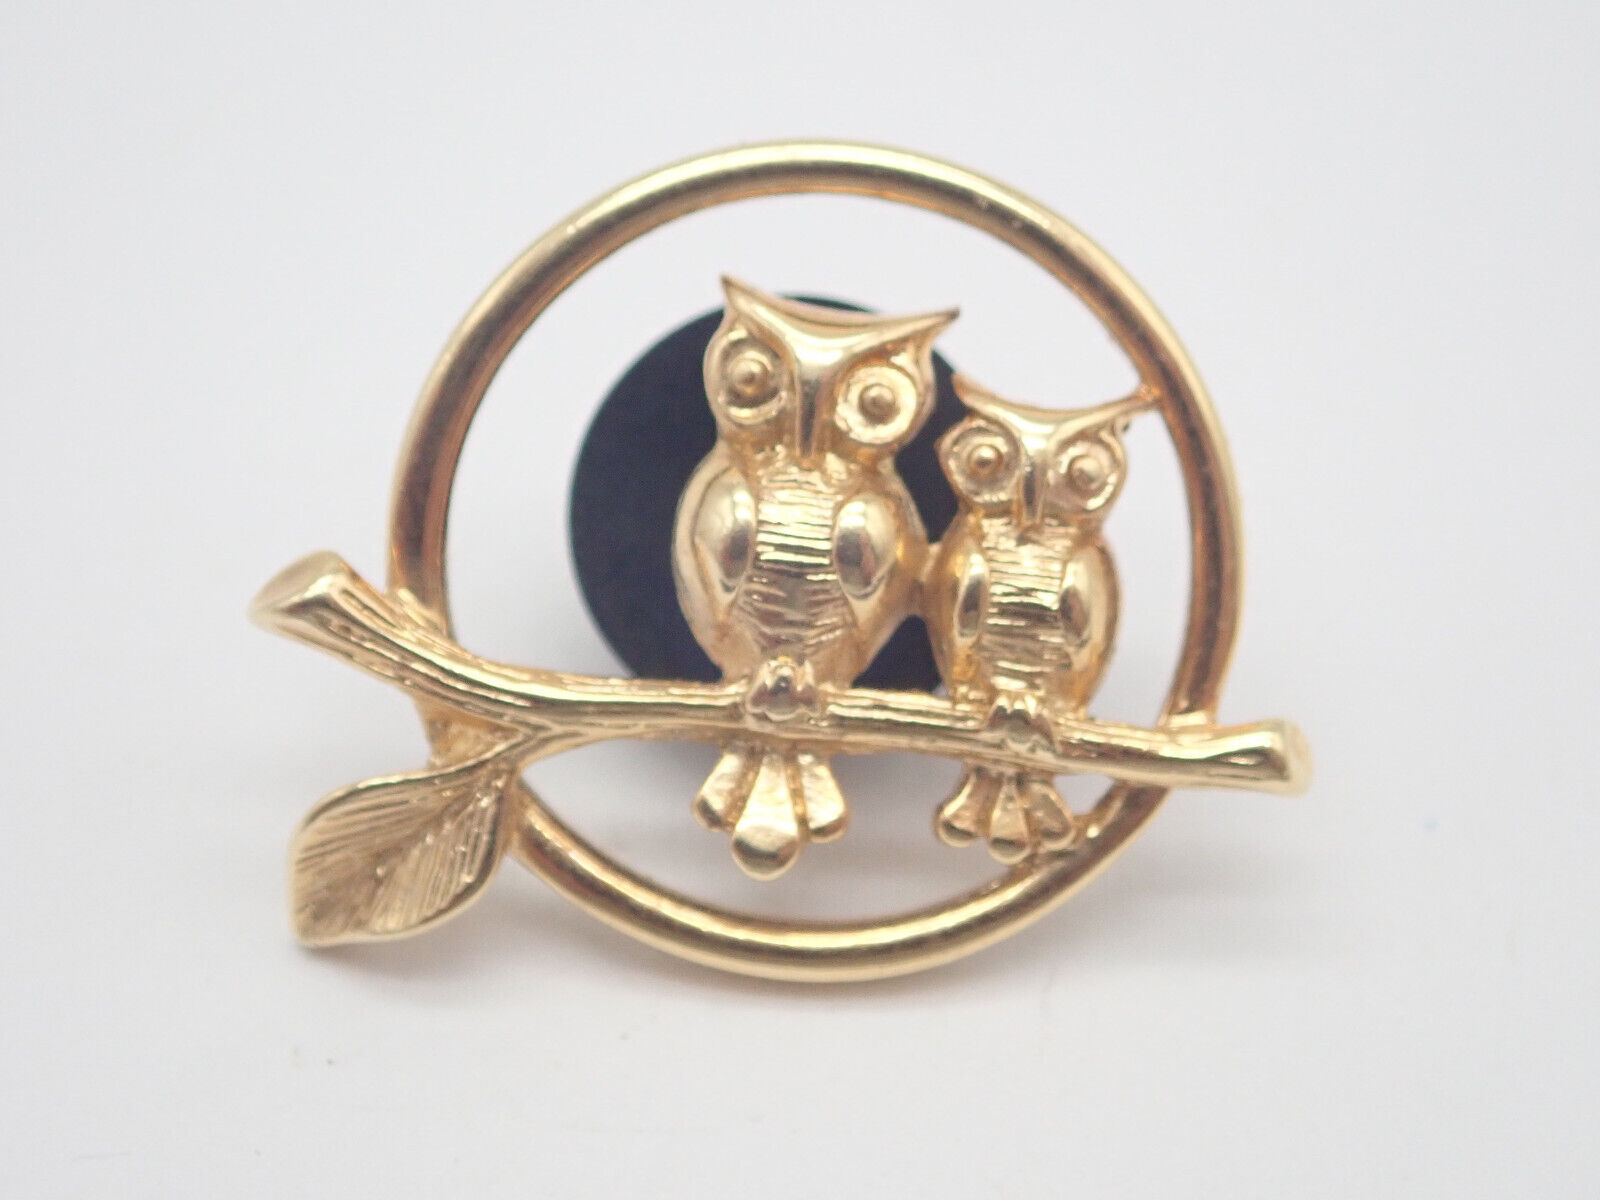 Two owls on Branch Gold Tone Vintage Lapel Pin